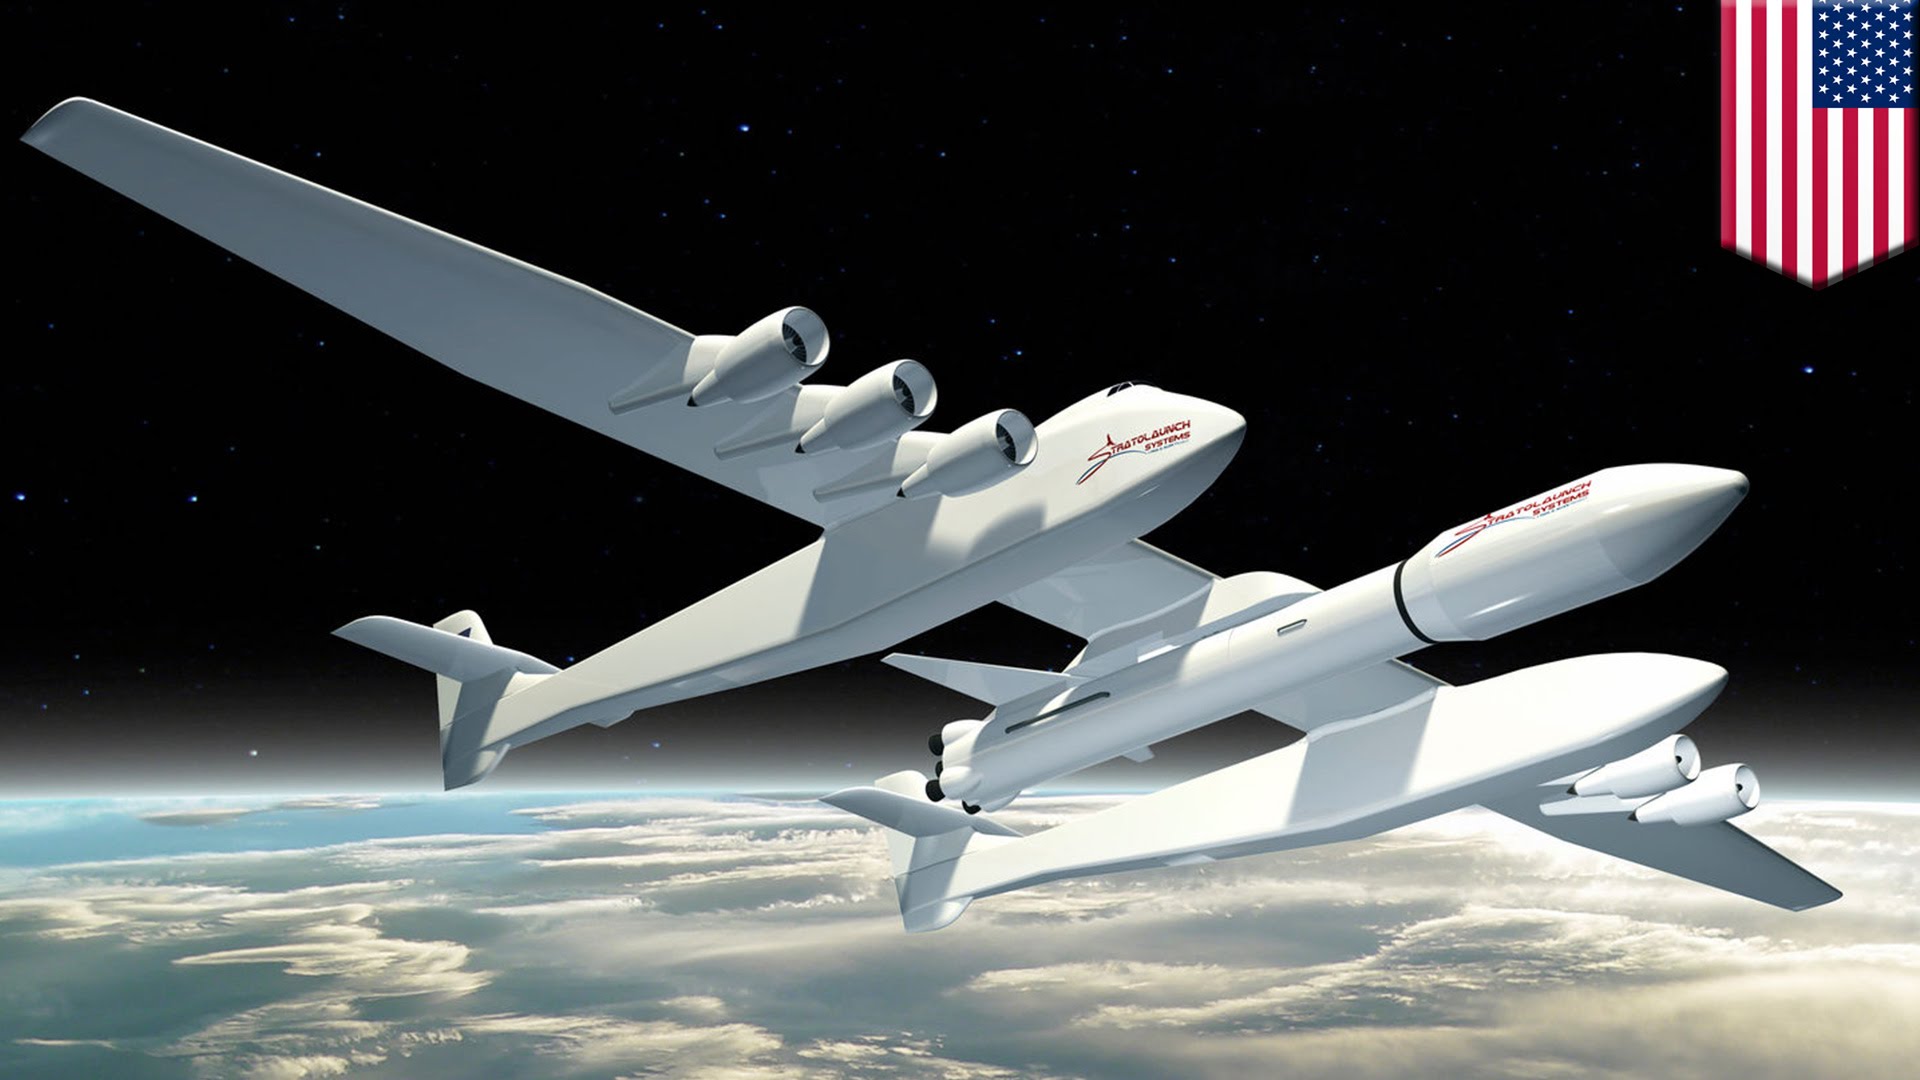 World's largest aircraft Stratolaunch to launch rockets into space ...